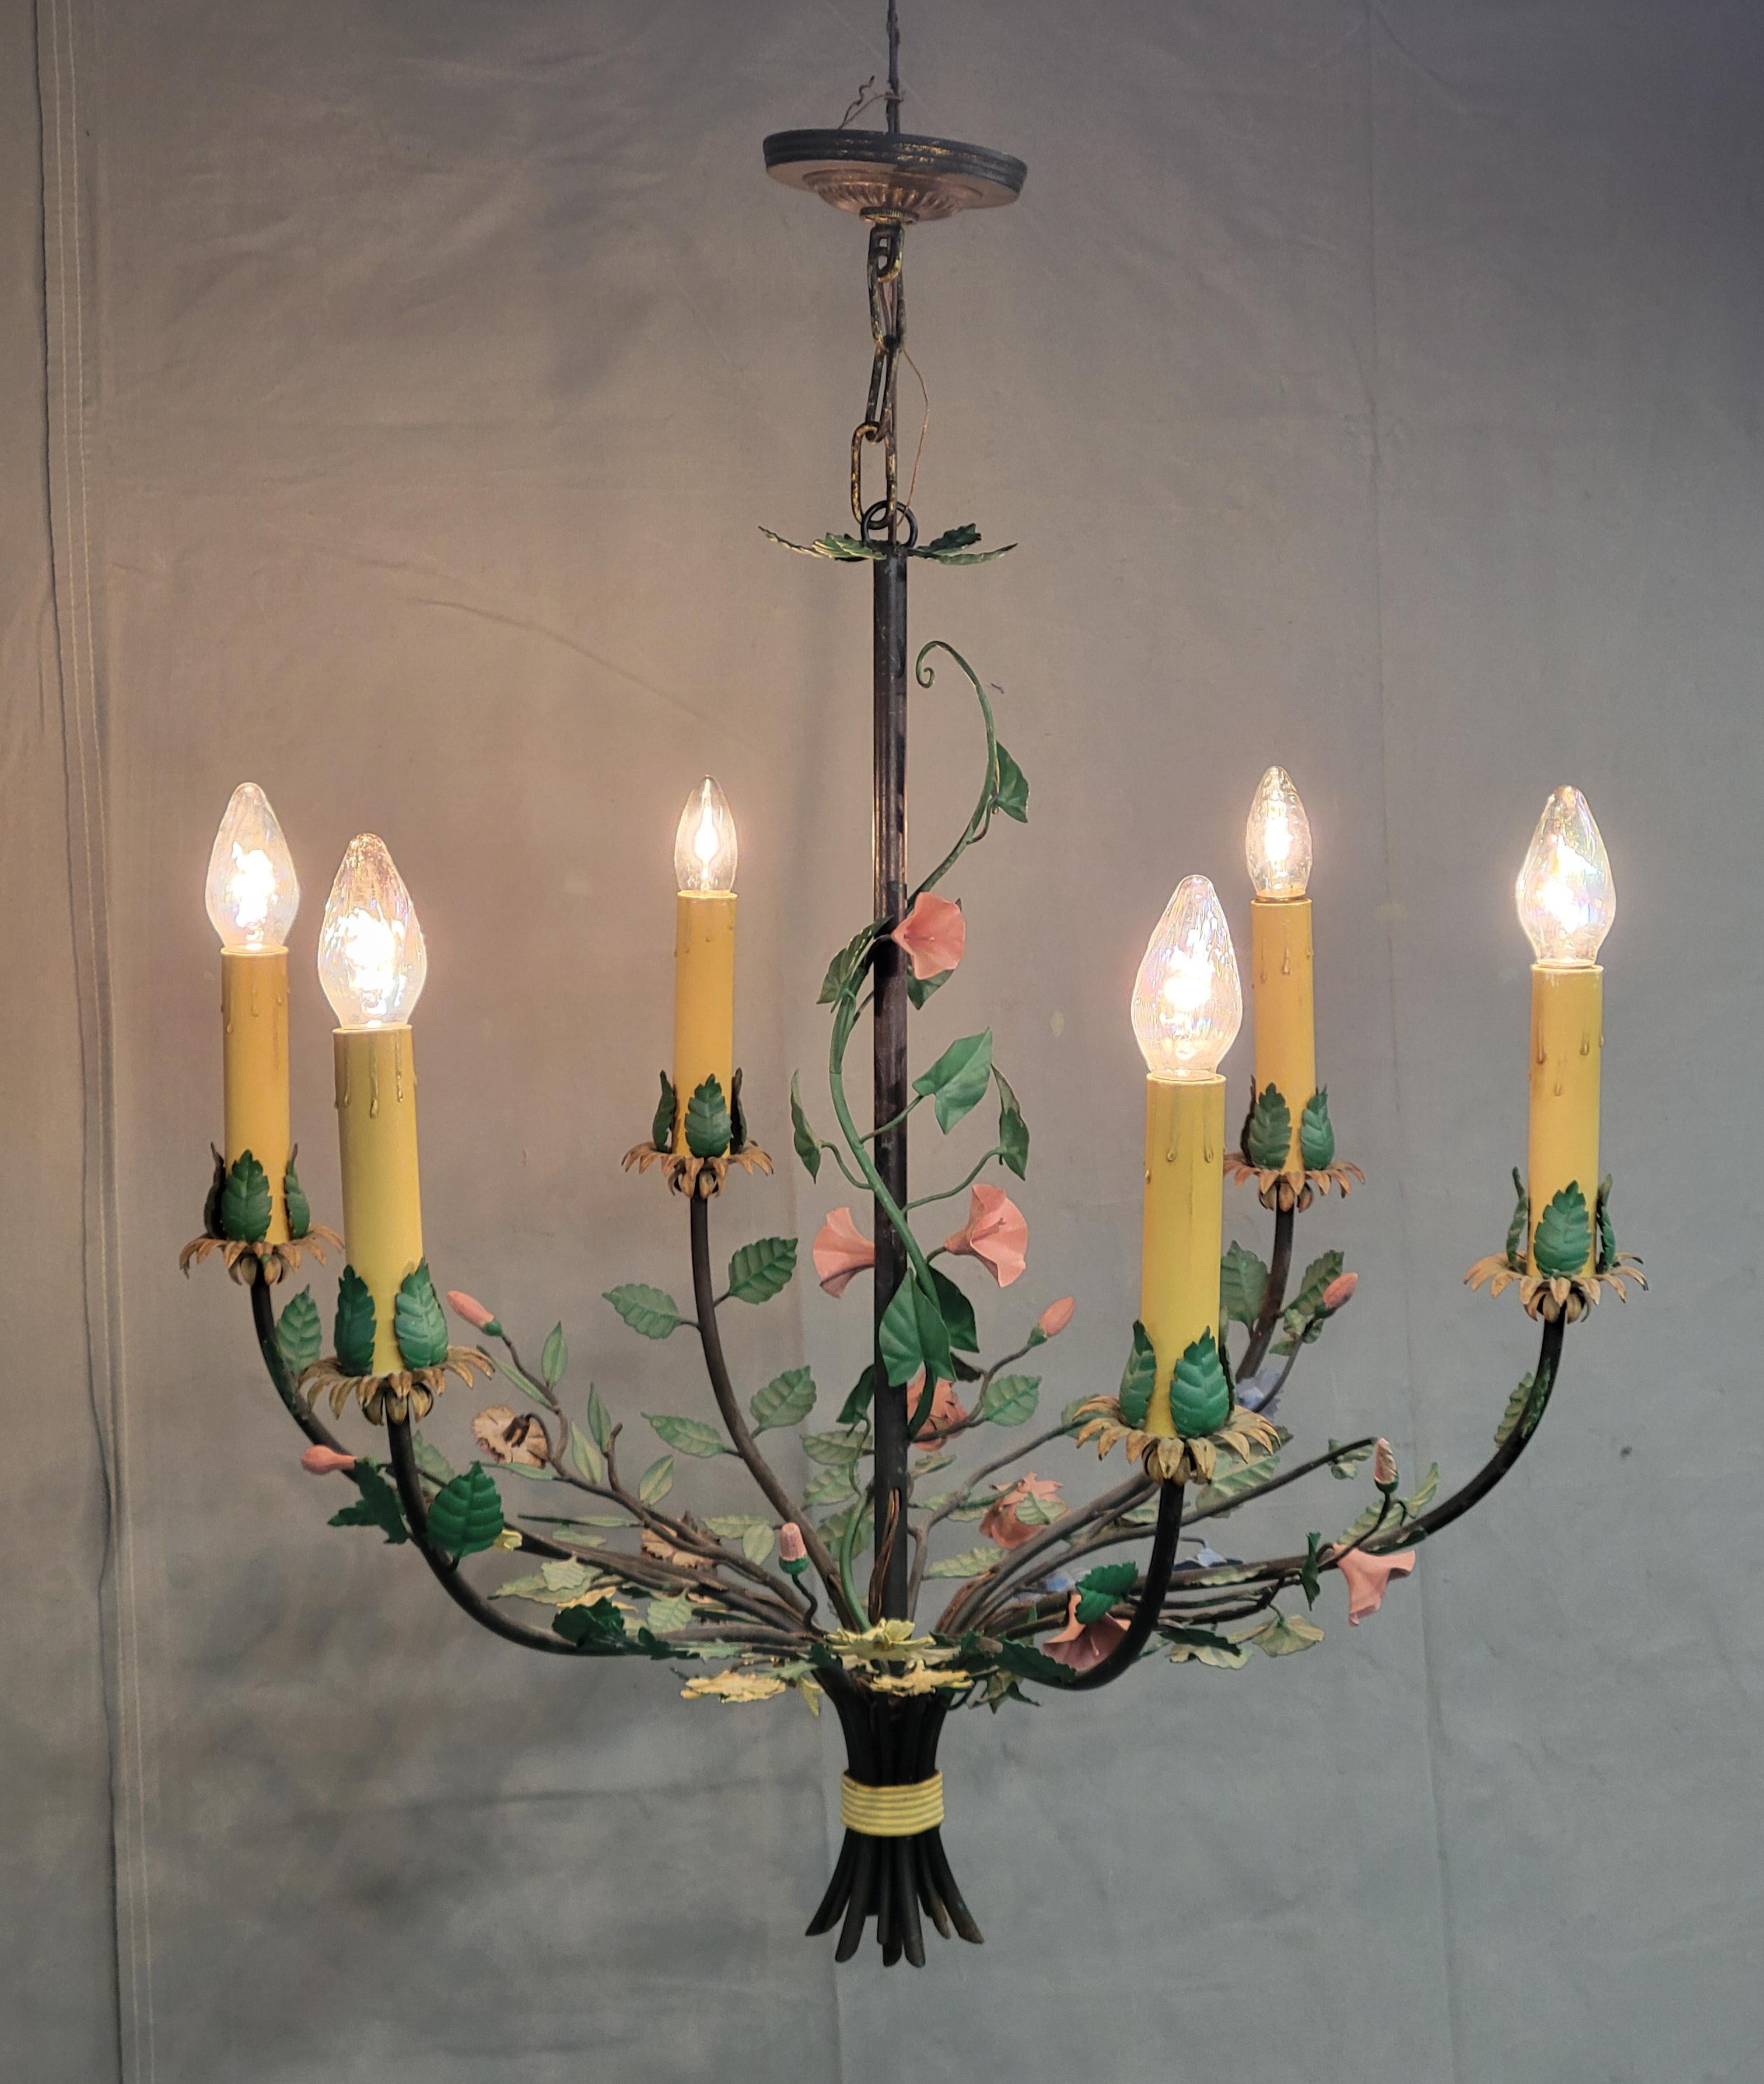 Just in time for spring, a truly charming vintage Italian tole chandelier crafted out of black wrought iron and decorated with beautifully painted flowers in shades of green, pink, blue and yellow. Likely from the 1950s, or perhaps earlier, this